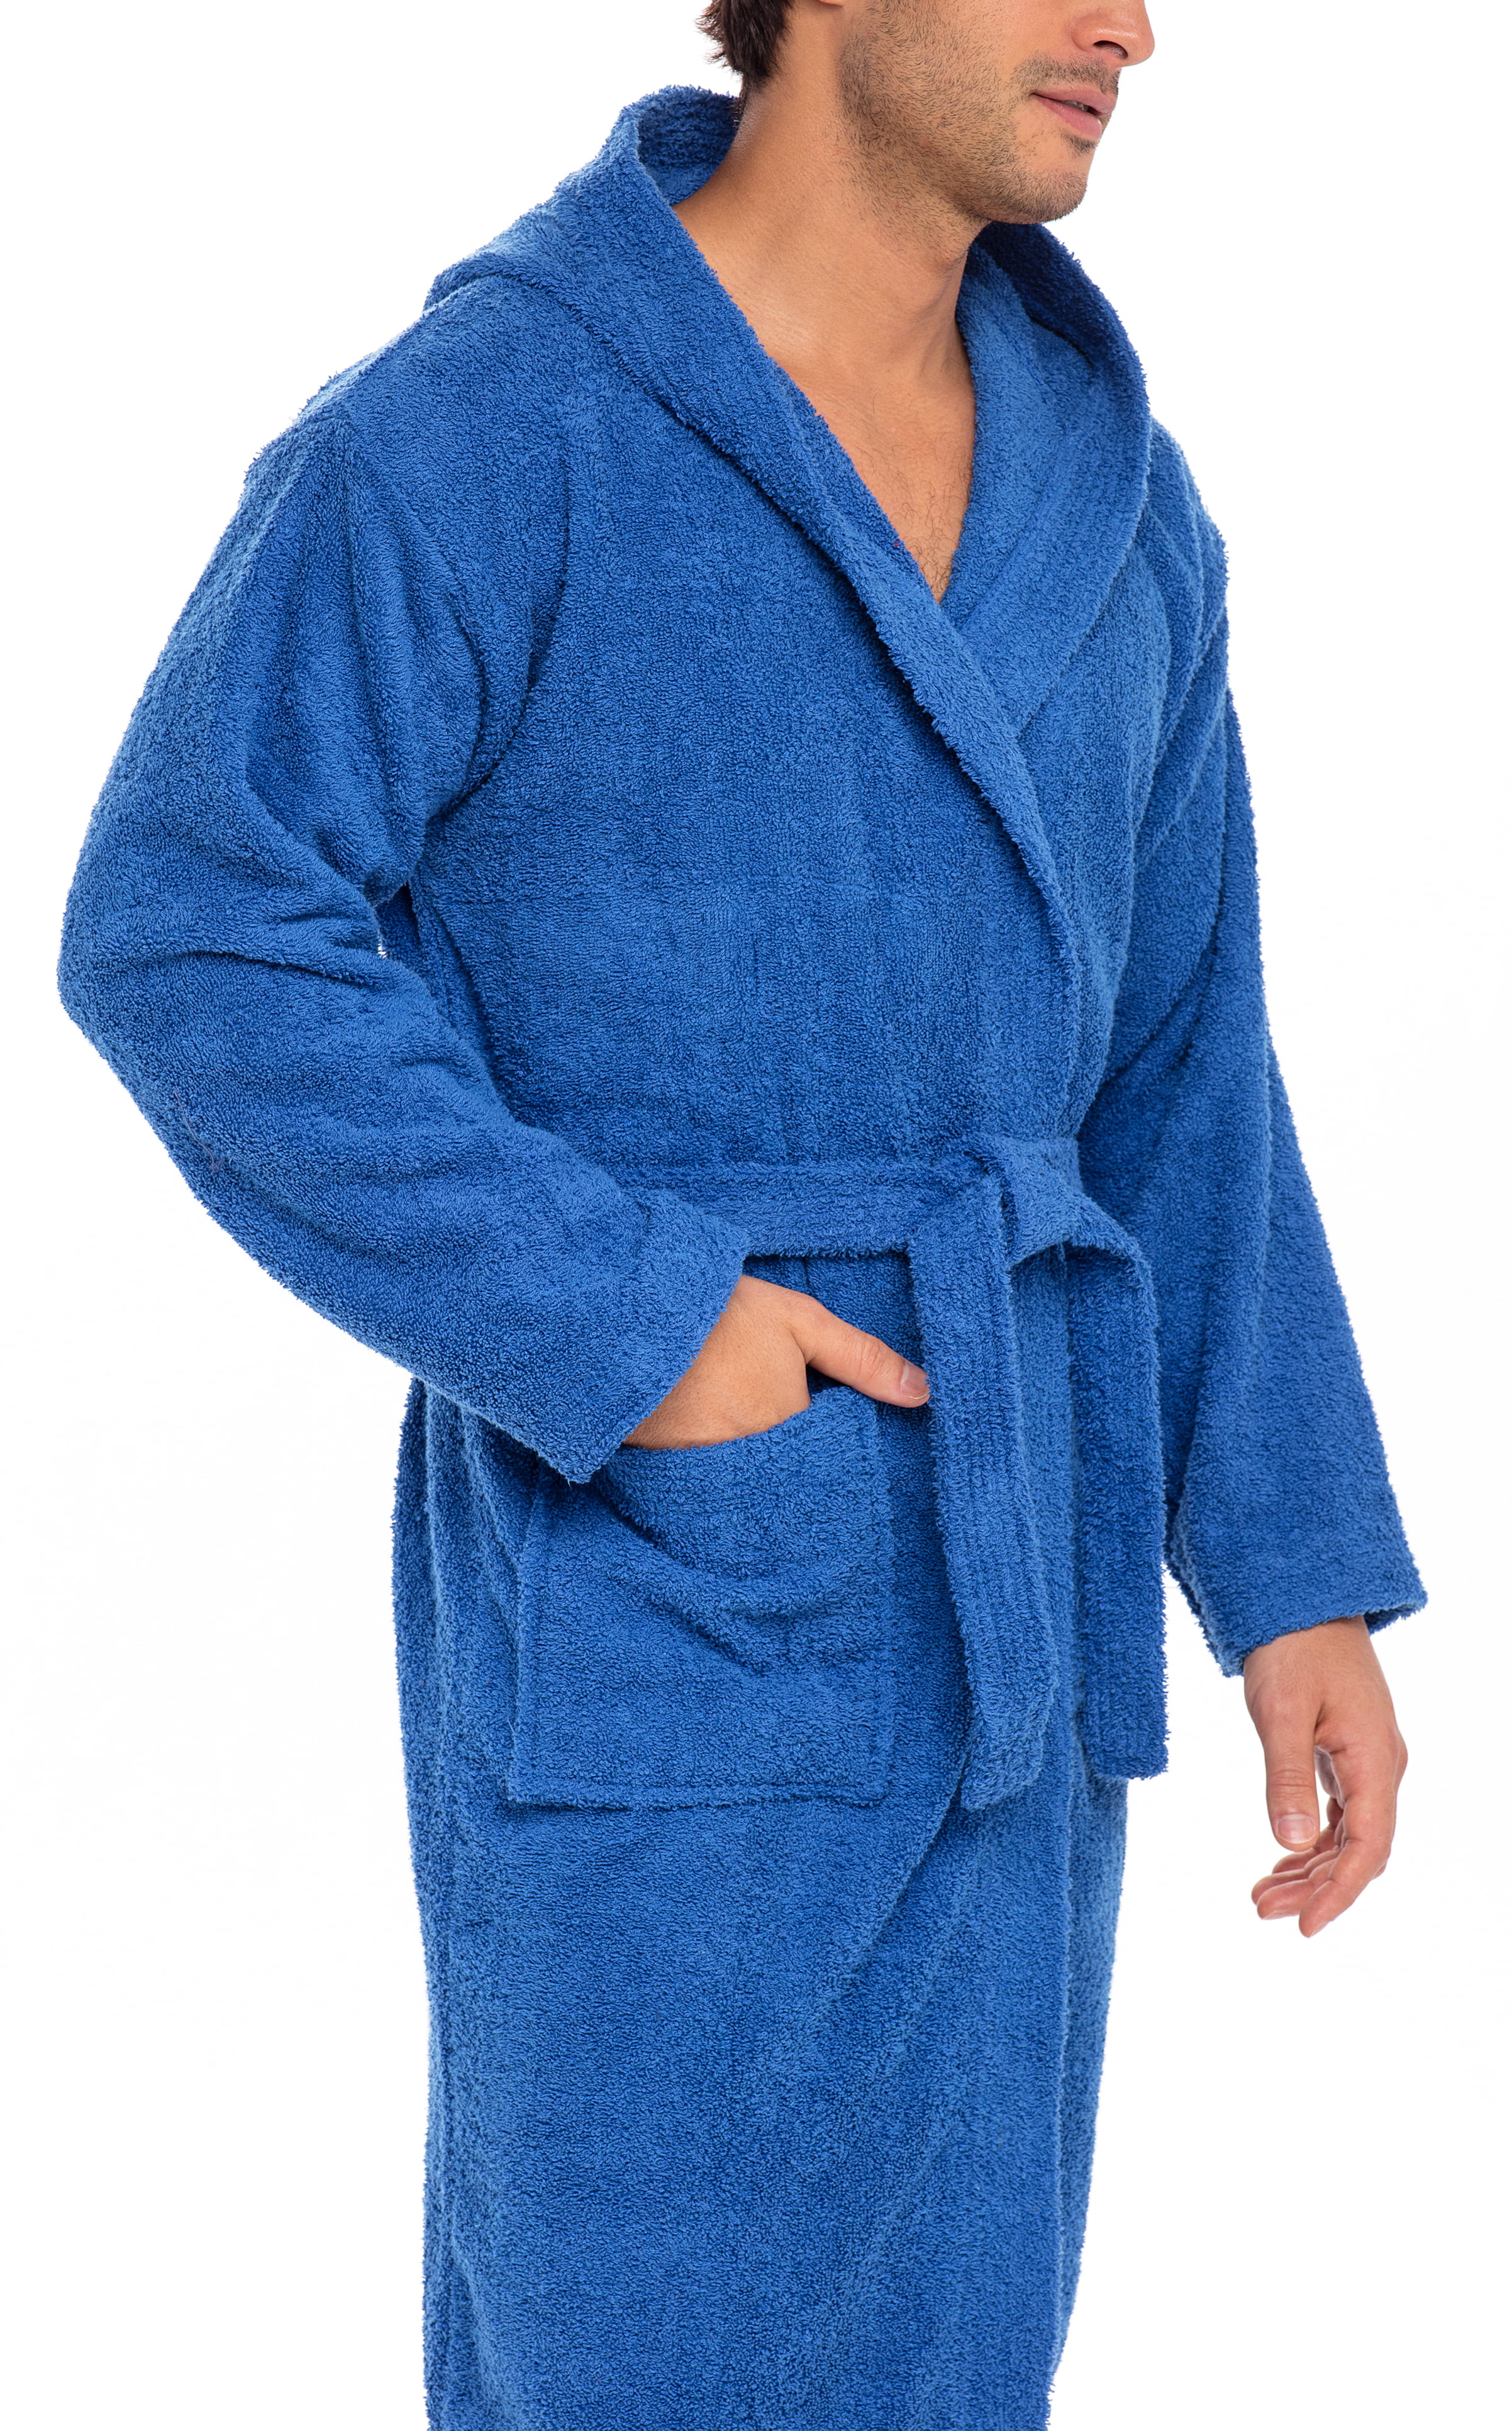 Unisex Cotton Classic Robe | Robes & Dressing Gowns | The White Company UK